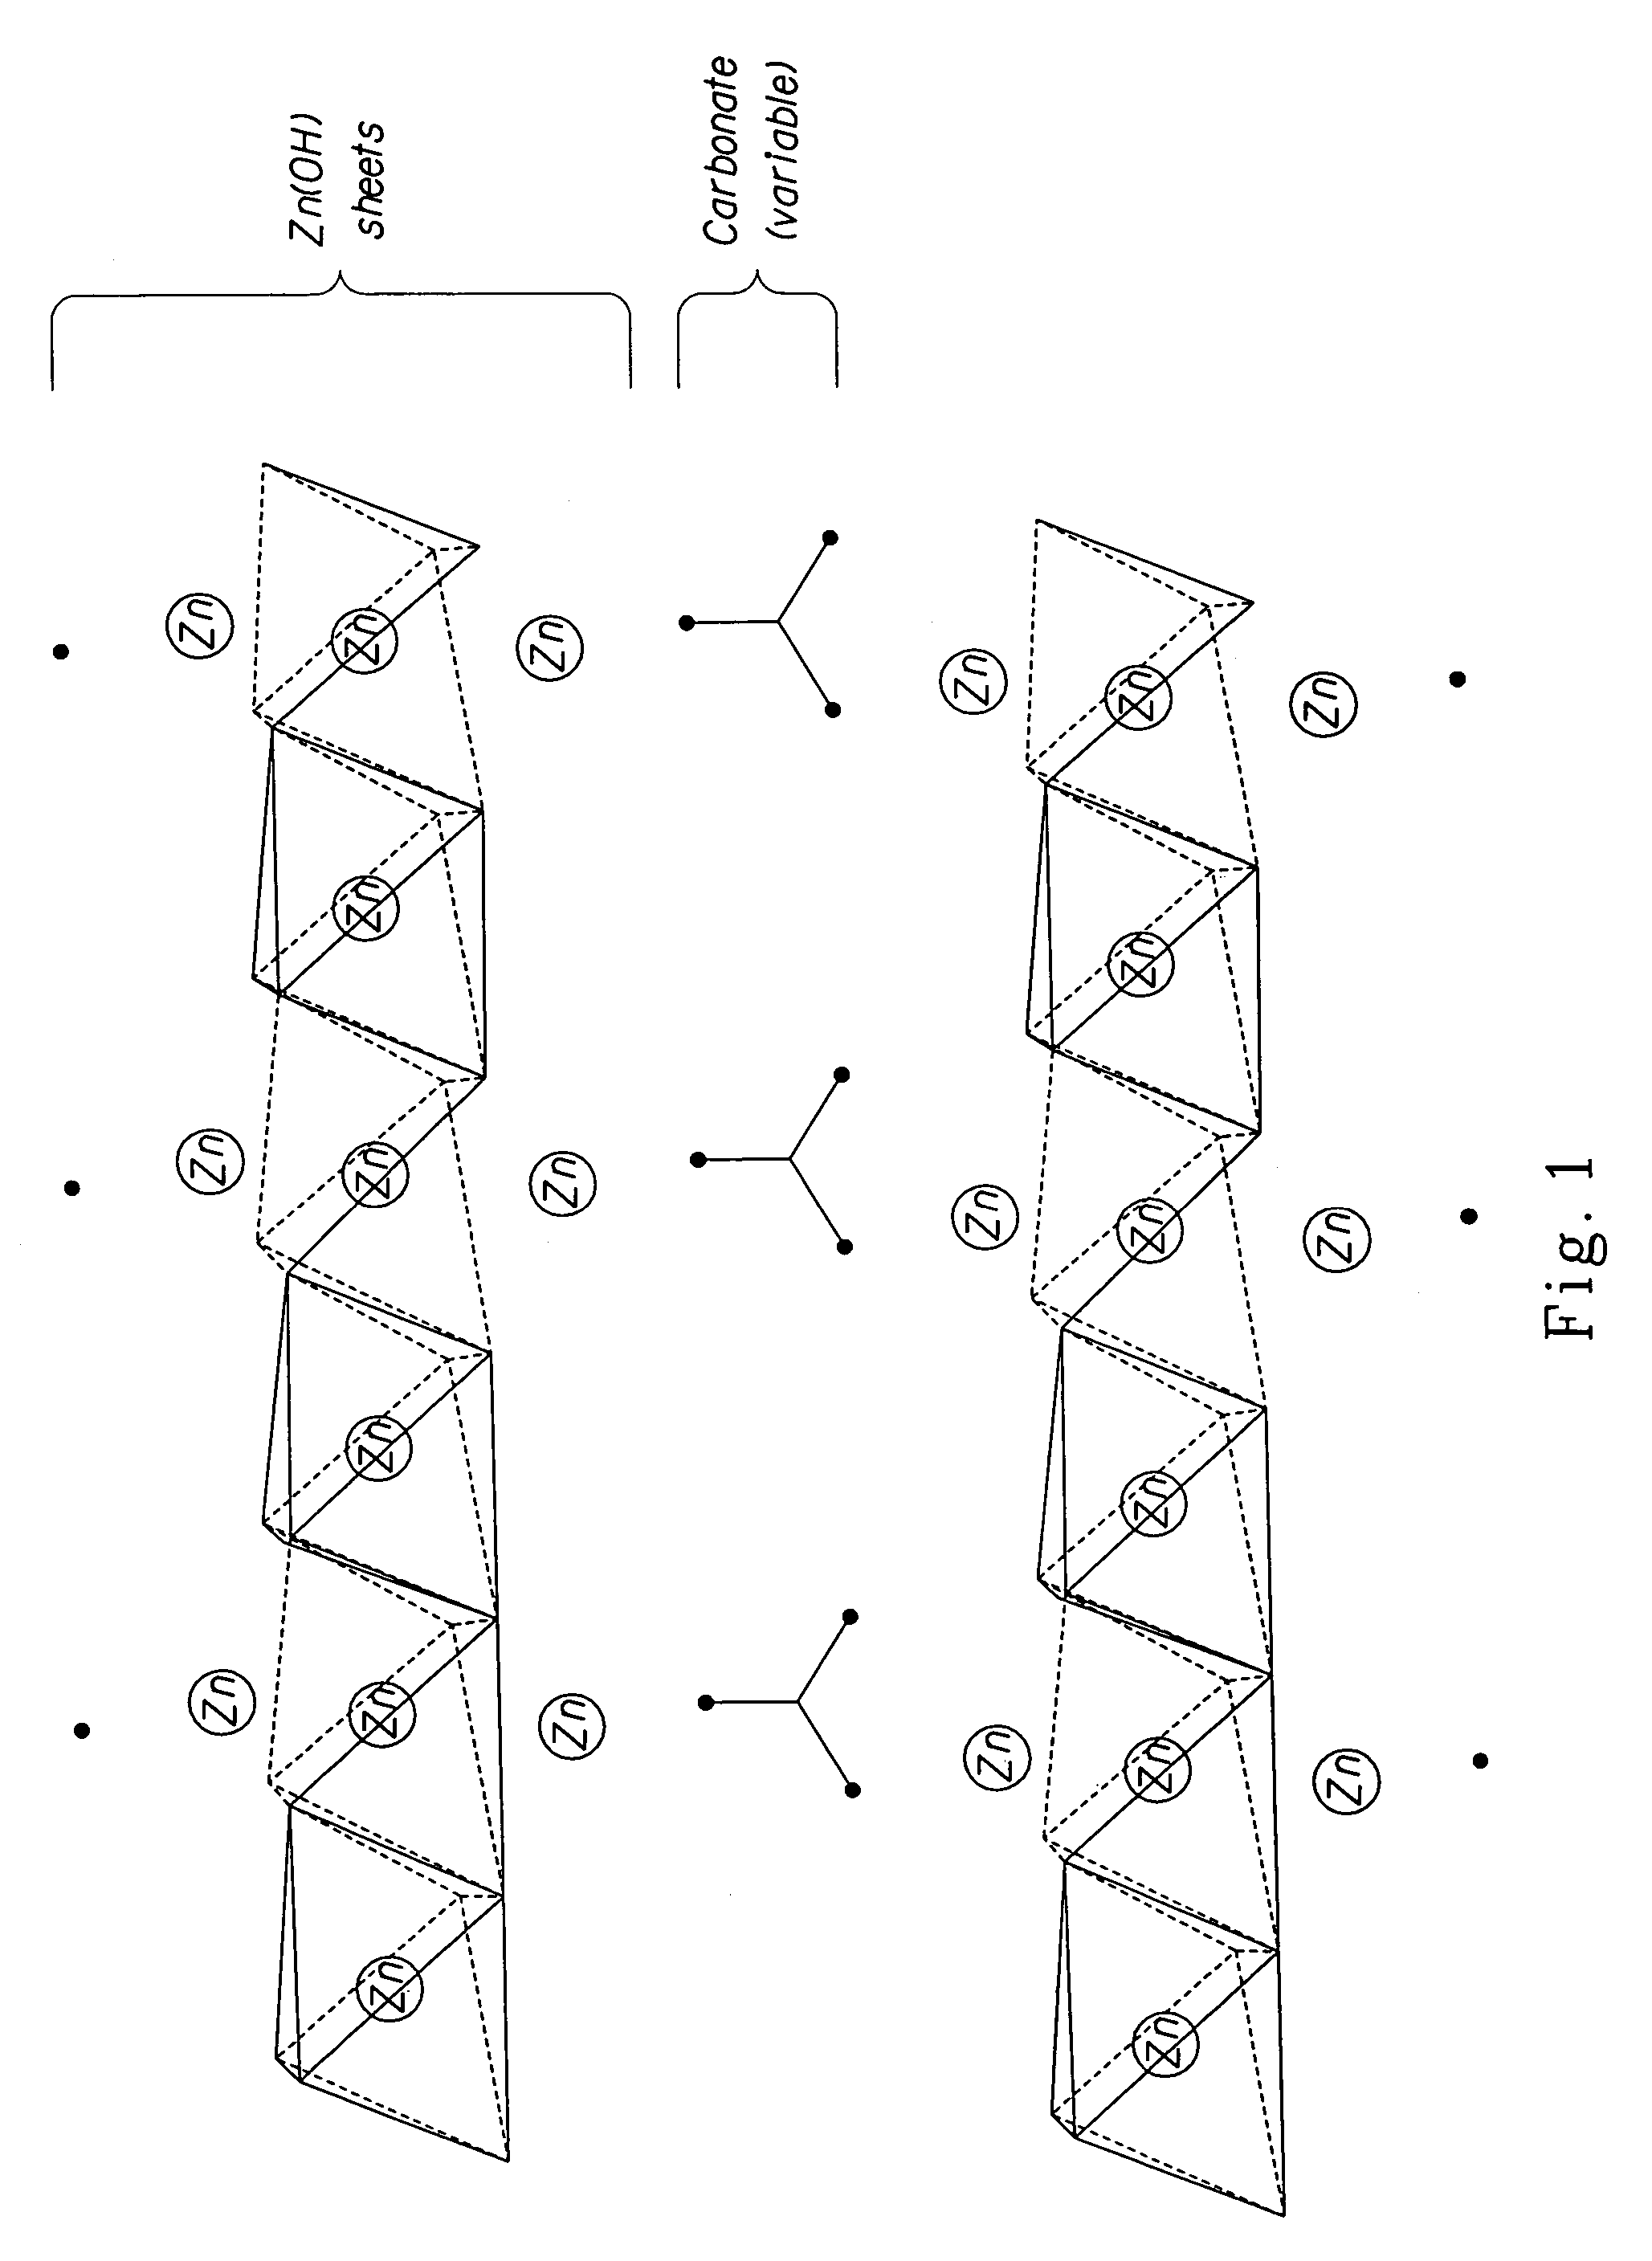 Compositions for protecting glassware from surface corrosion in automatic dishwashing appliances